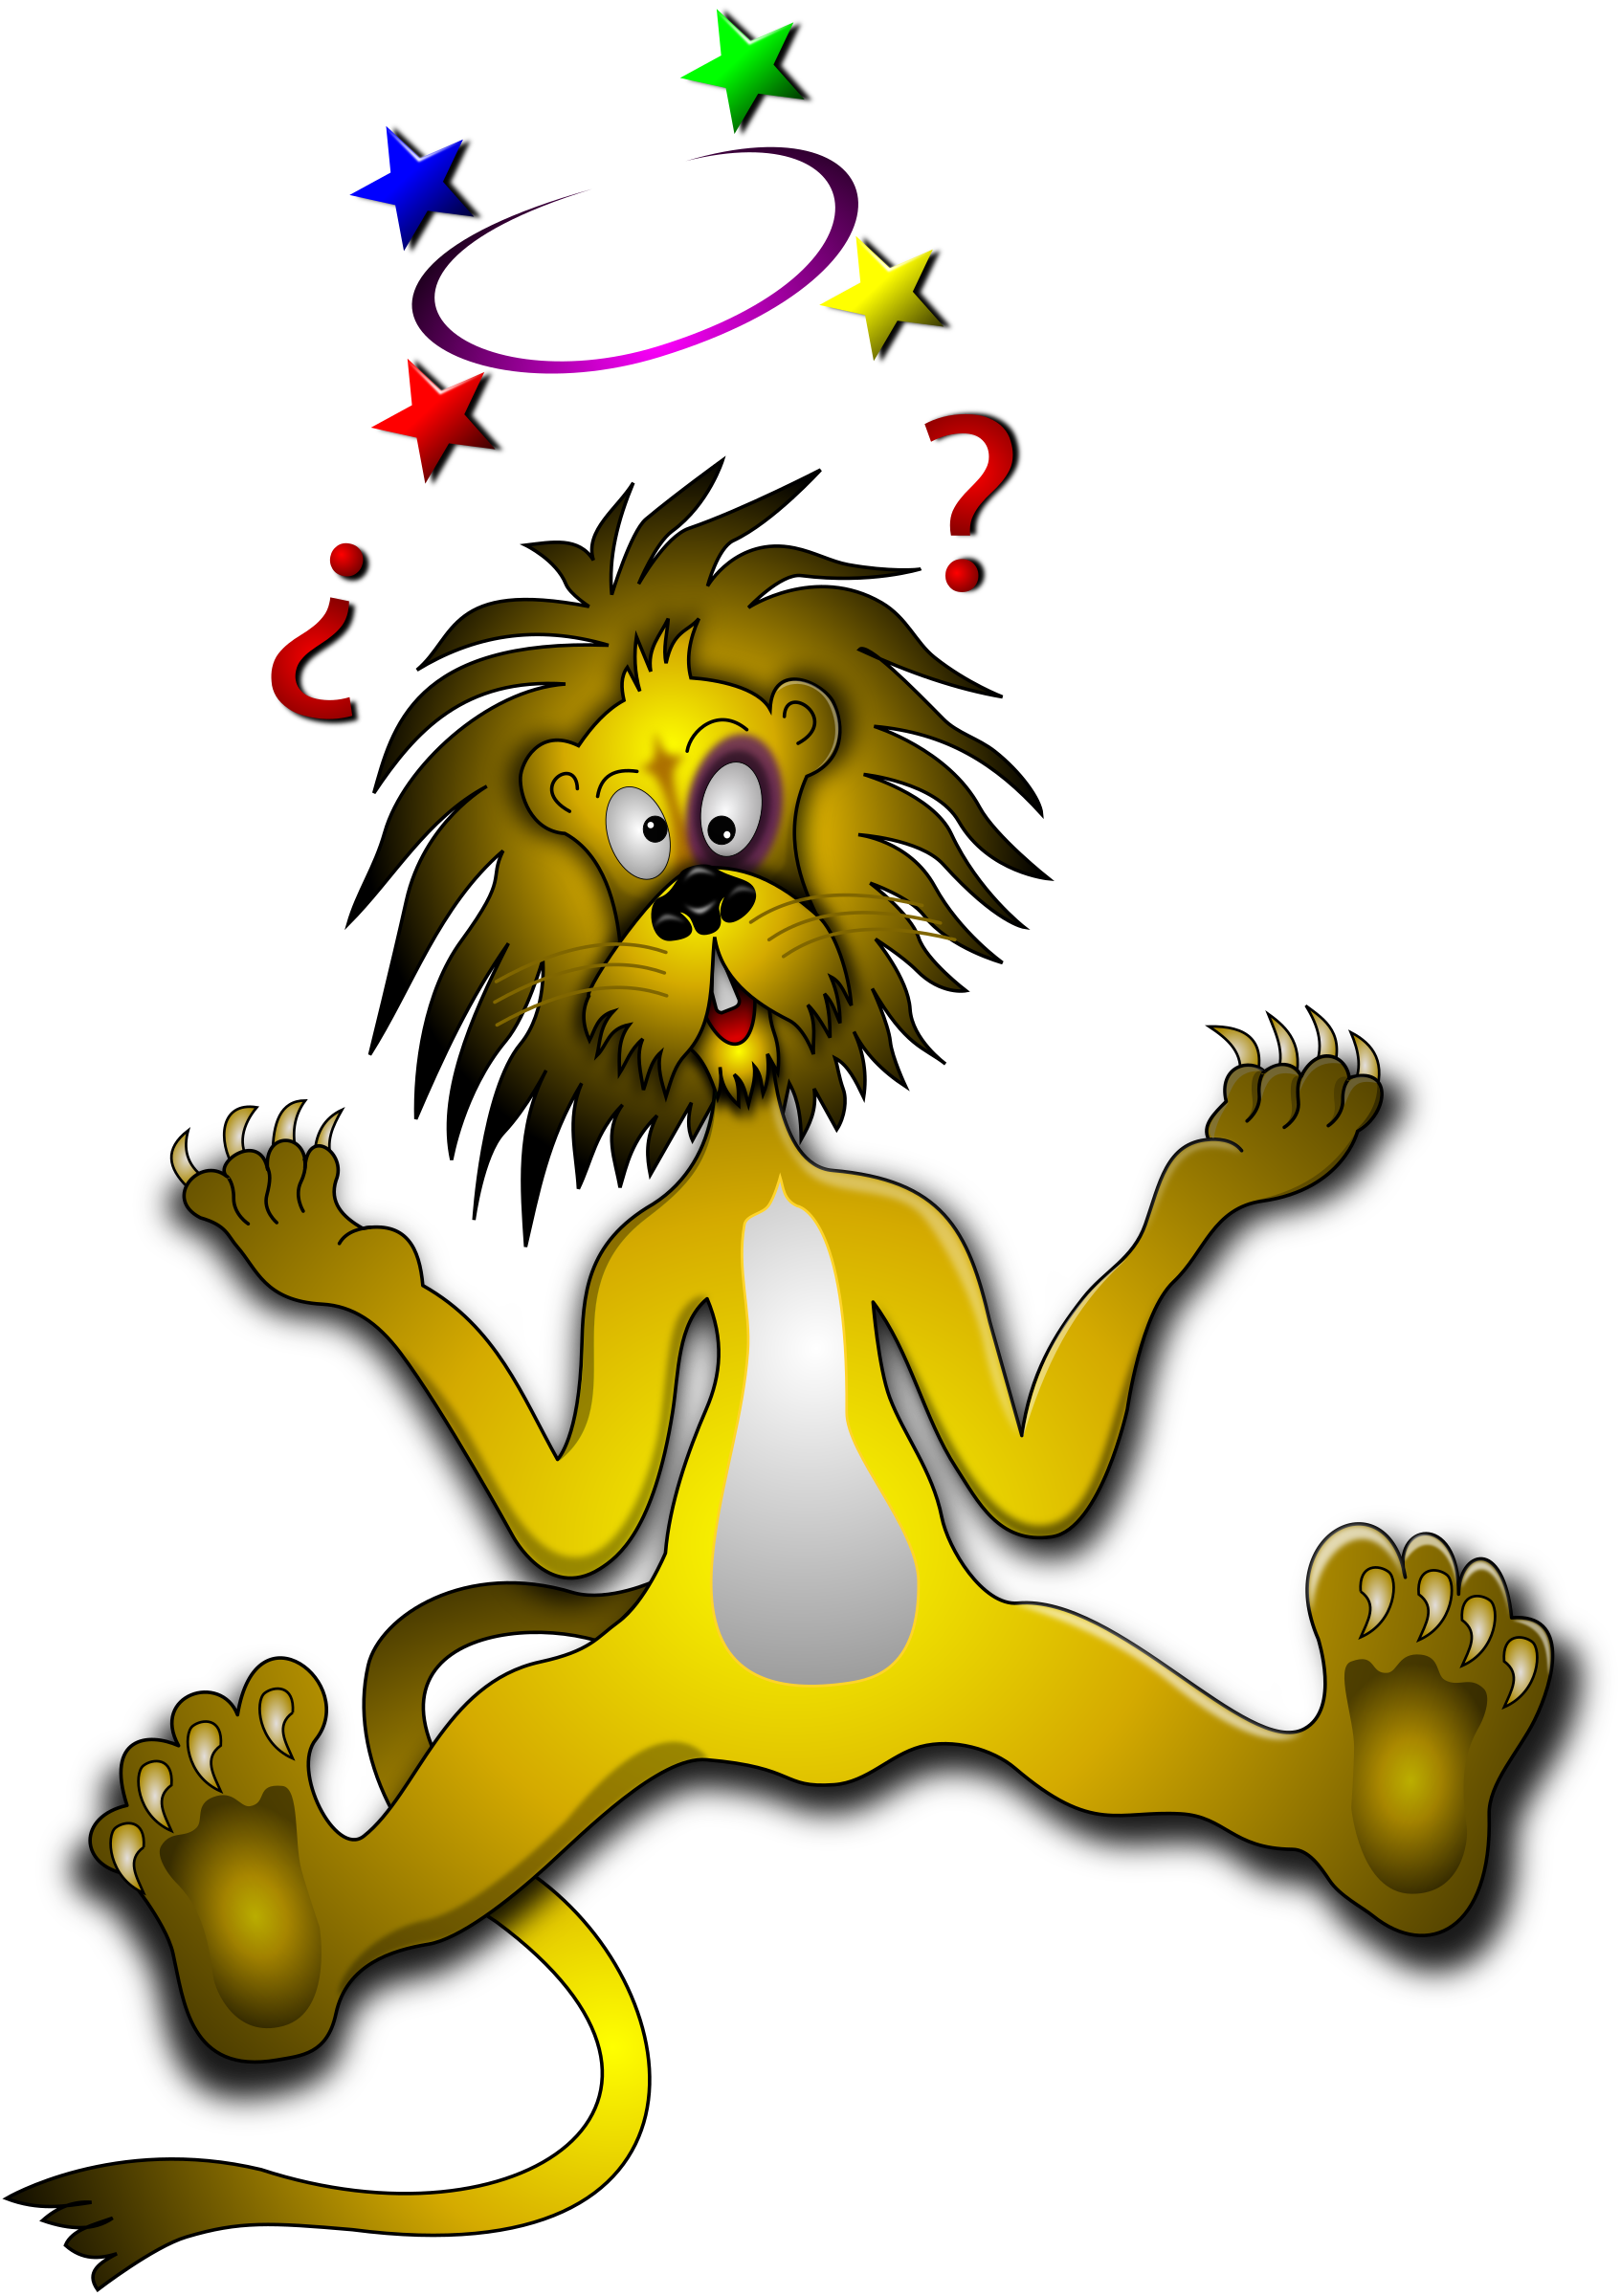 Lion with black eye. Confused clipart dazed and confused